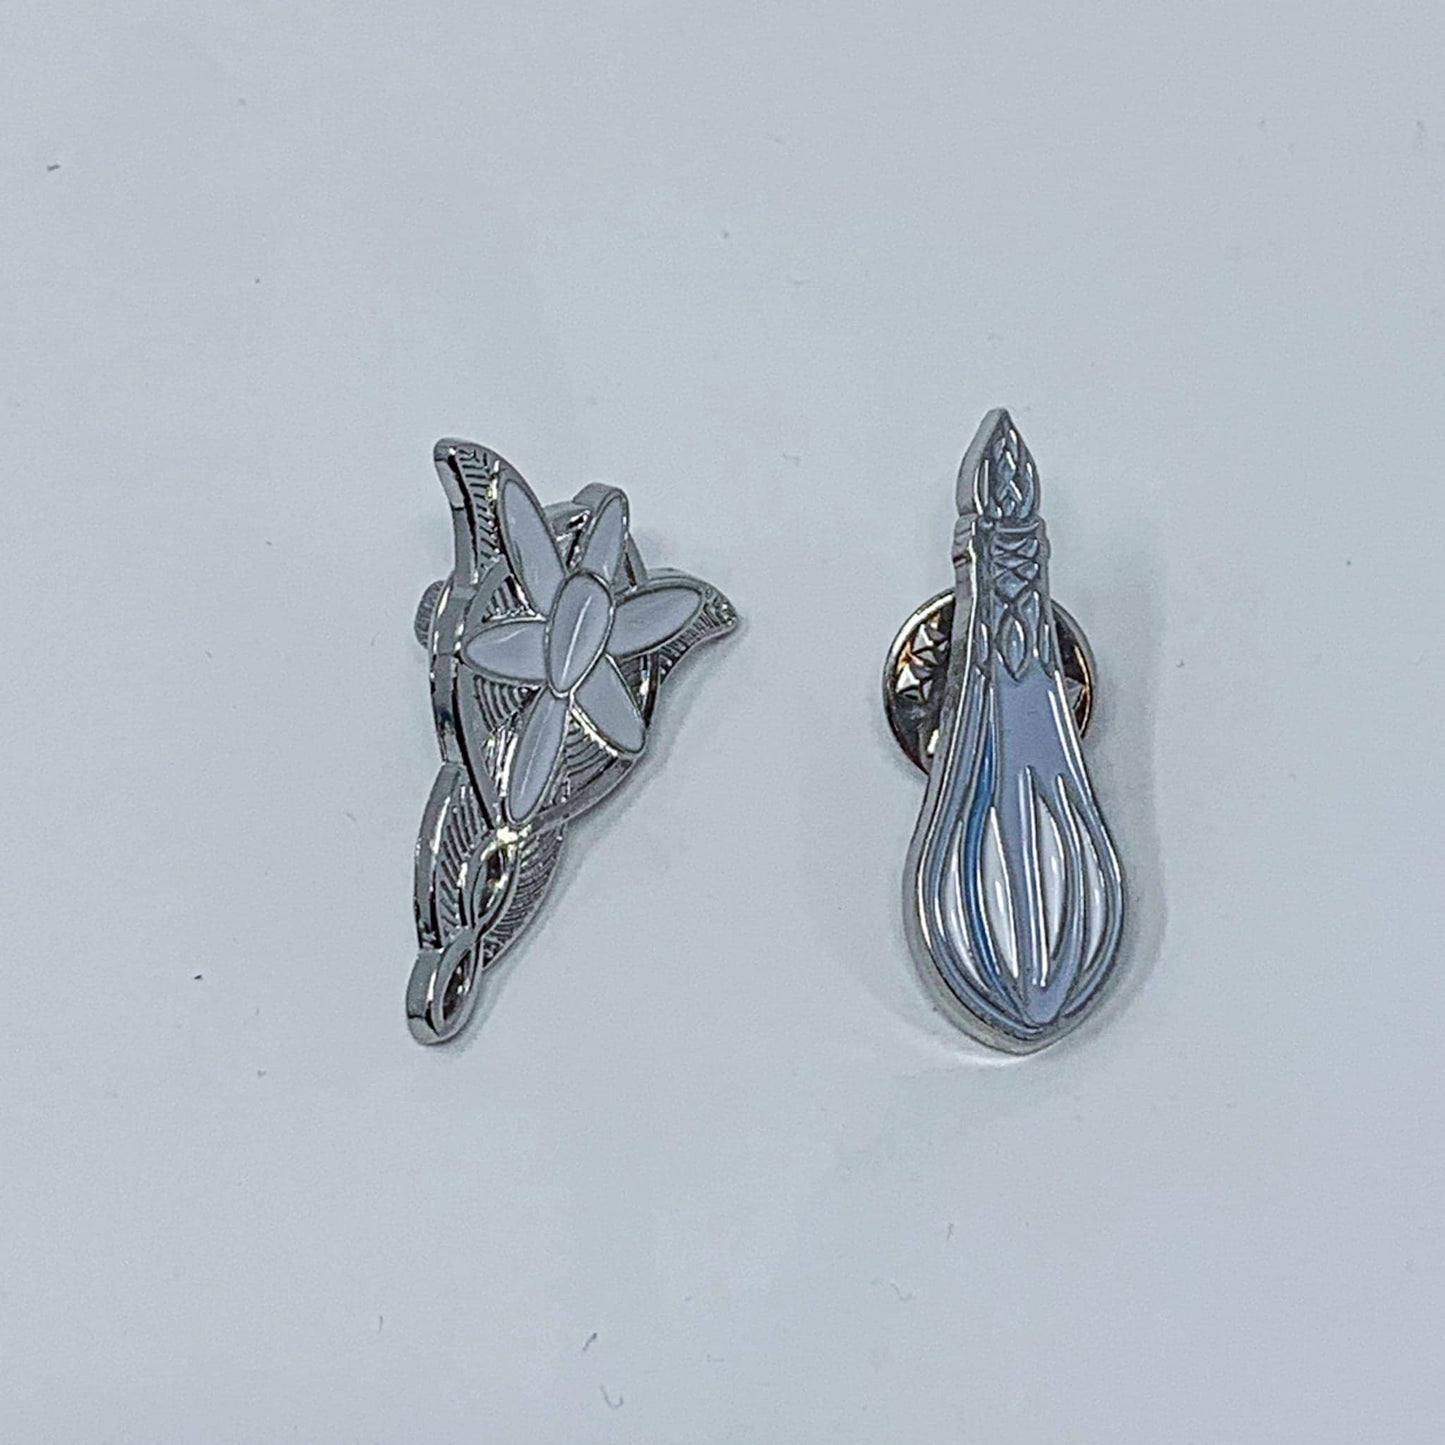 Evenstar and Galadriel's Phial Lord of the Rings Pin Set